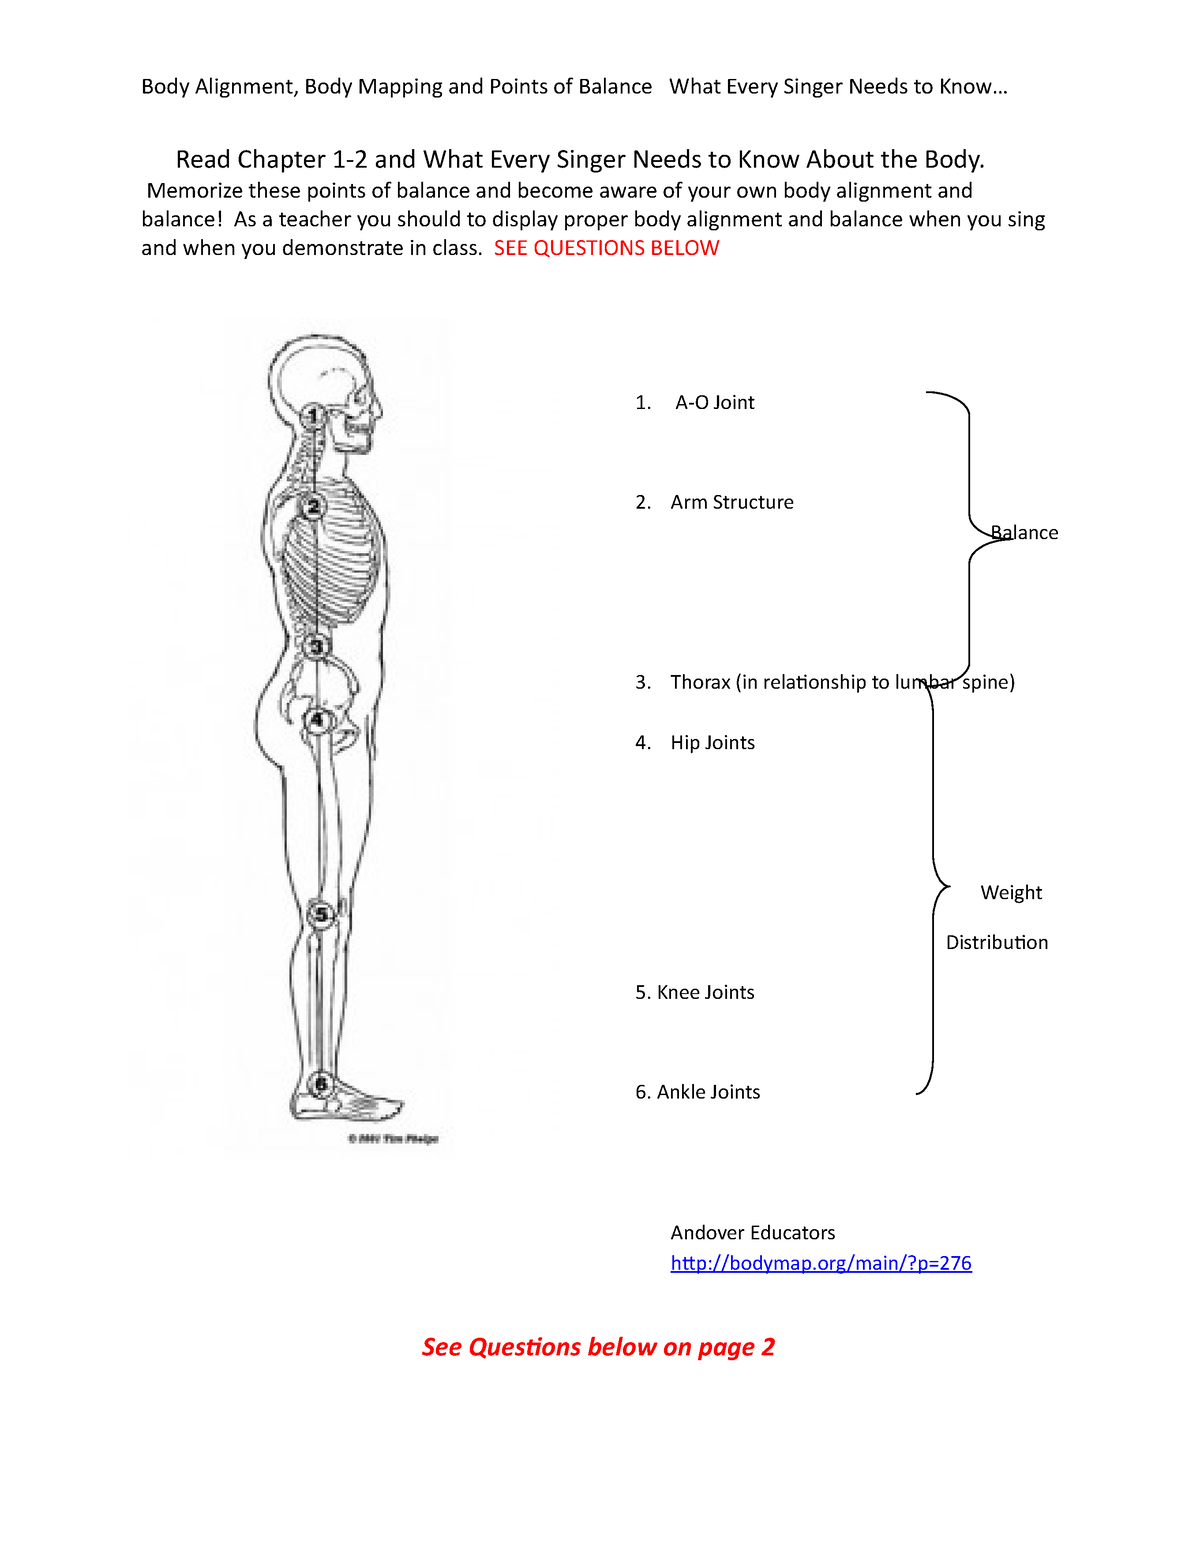 Body Mapping, Body Alignment and Balance Assignment - Read Chapter